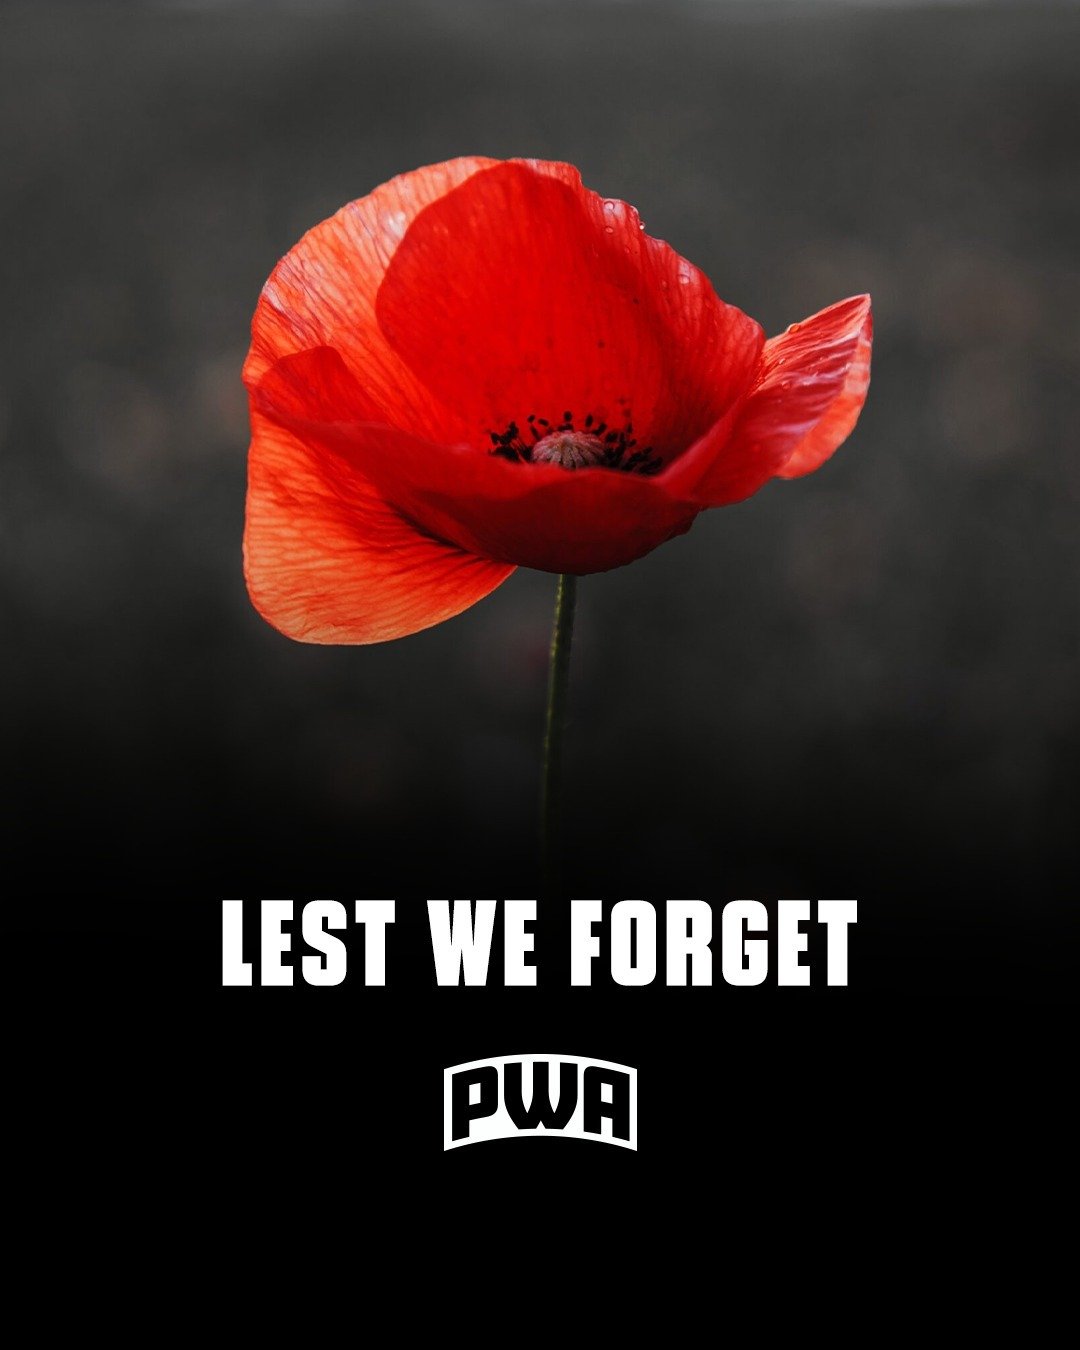 They shall grow not old, as we that are left grow old:
Age shall not weary them, nor the years condemn.
At the going down of the sun and in the morning
We will remember them.

#Lestweforget #anzacday